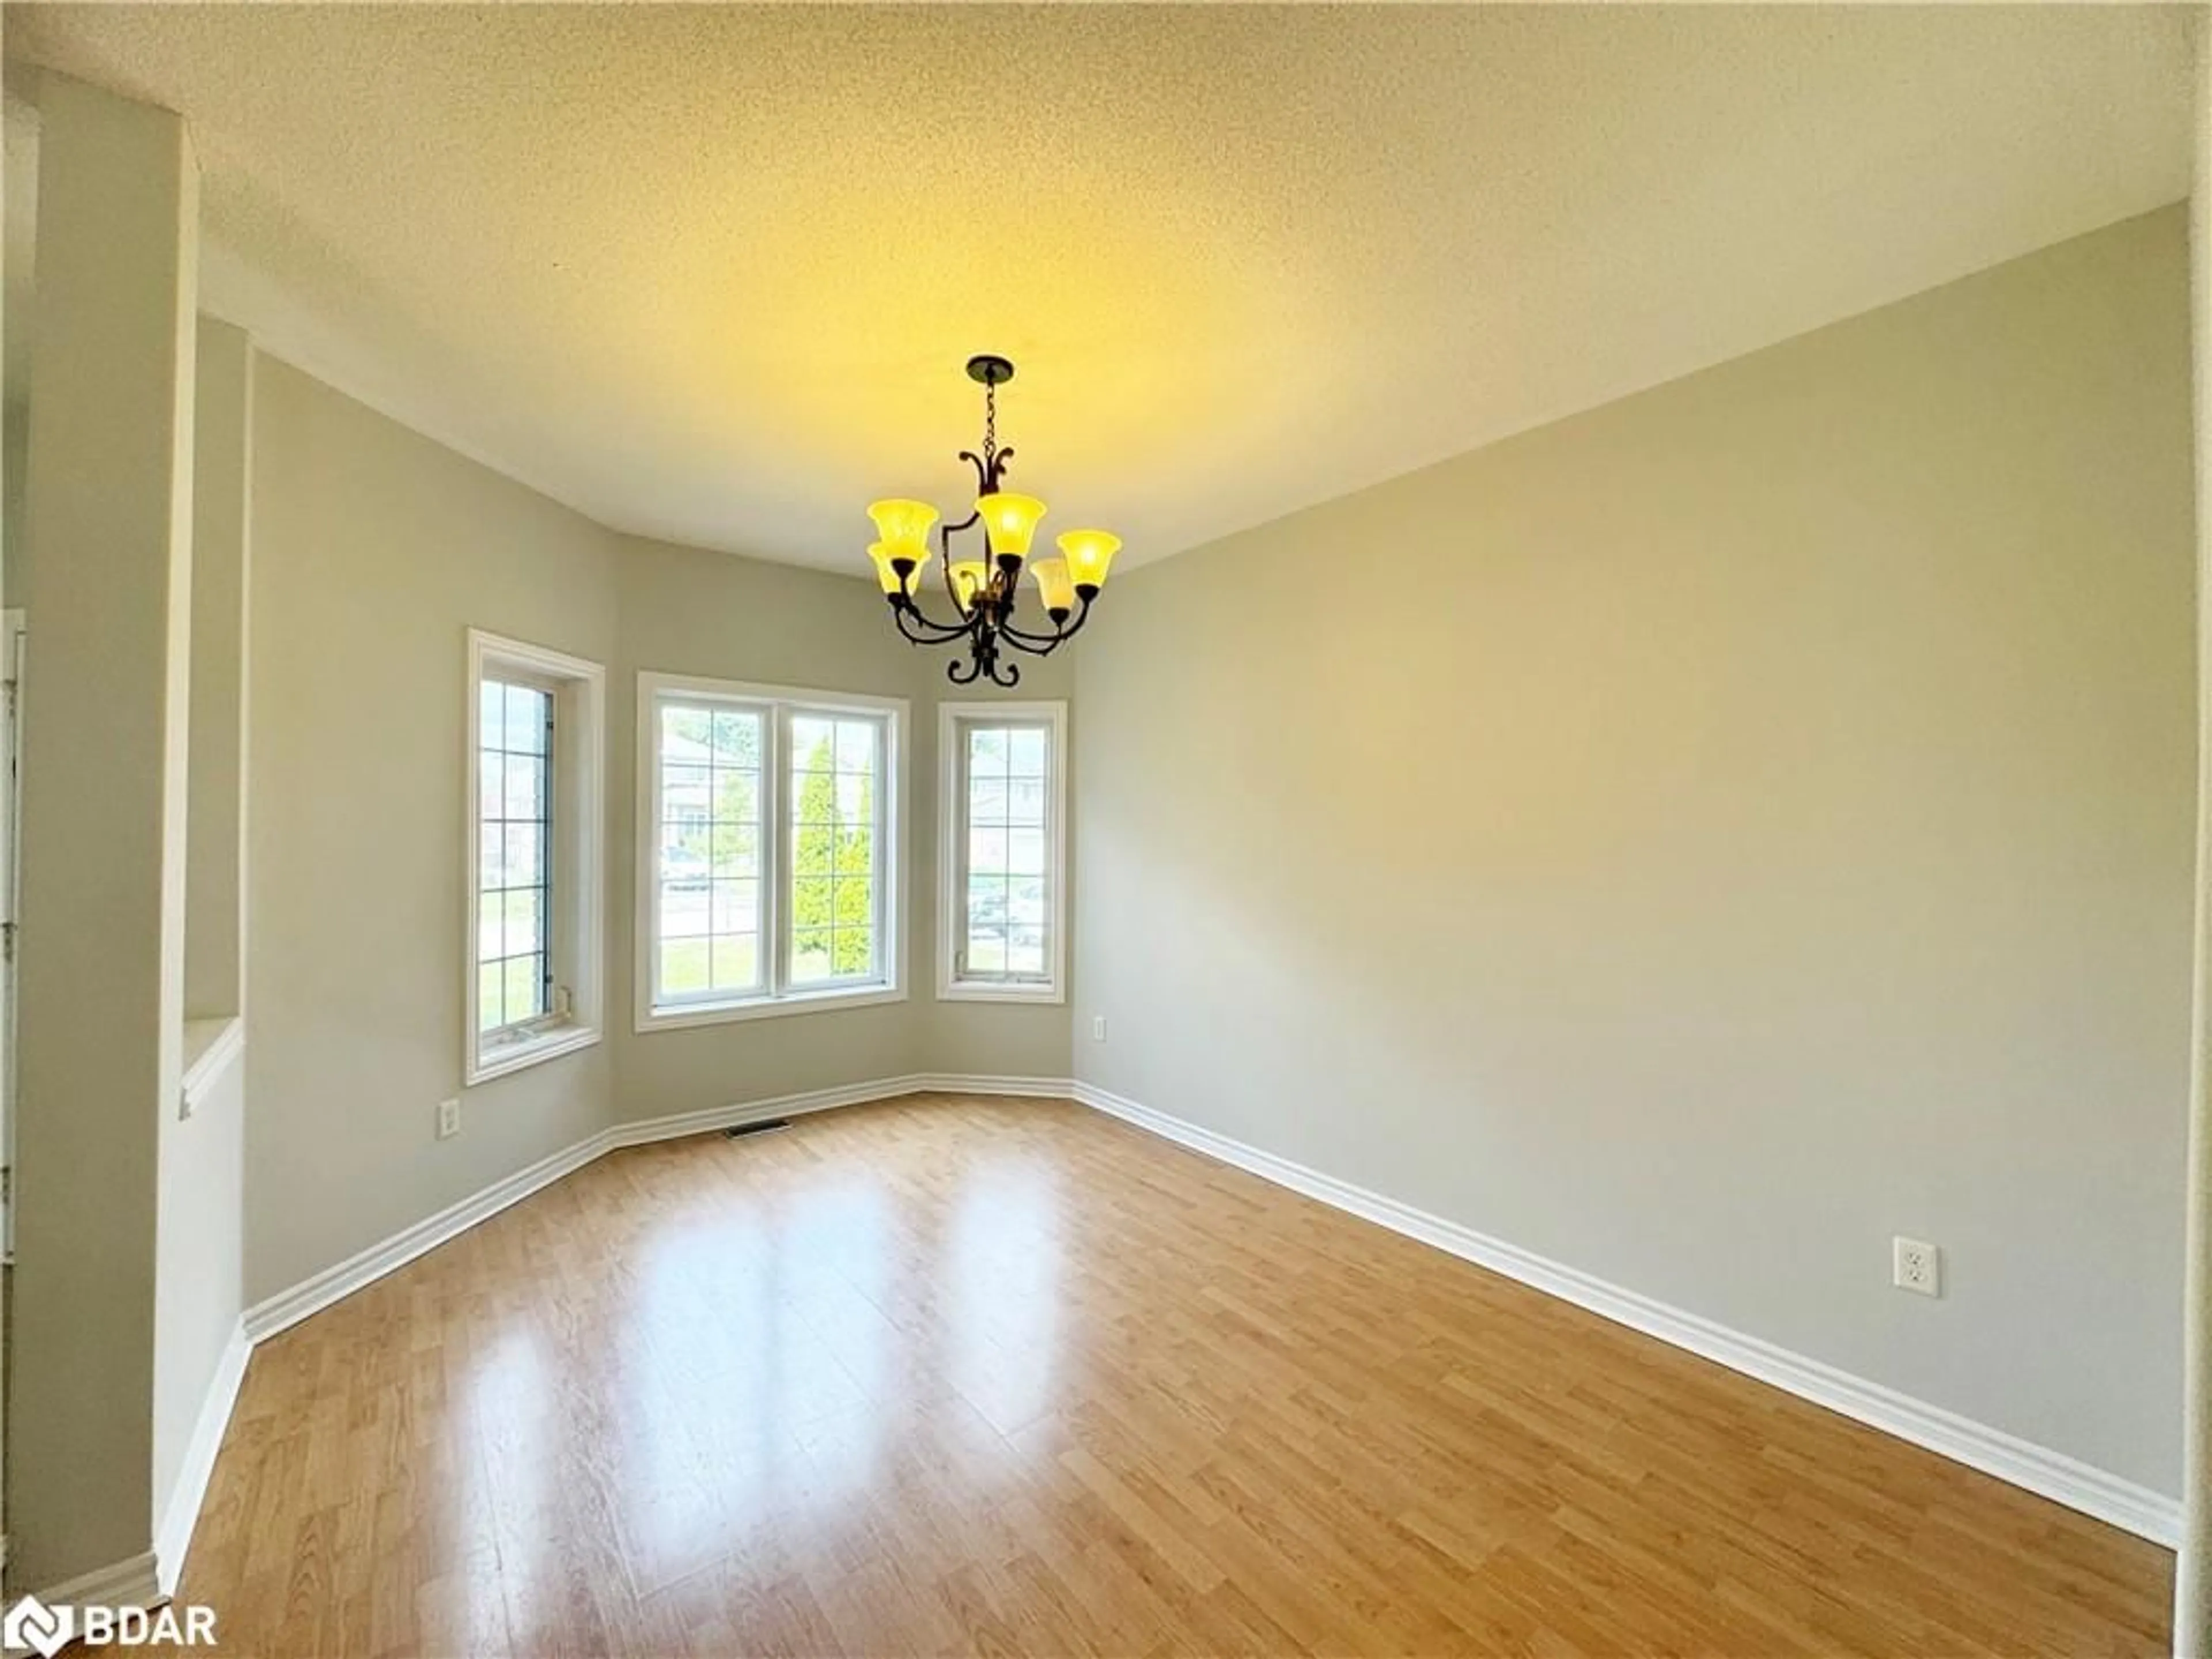 A pic of a room for 57 Penvill Trail, Barrie Ontario L4N 5M8